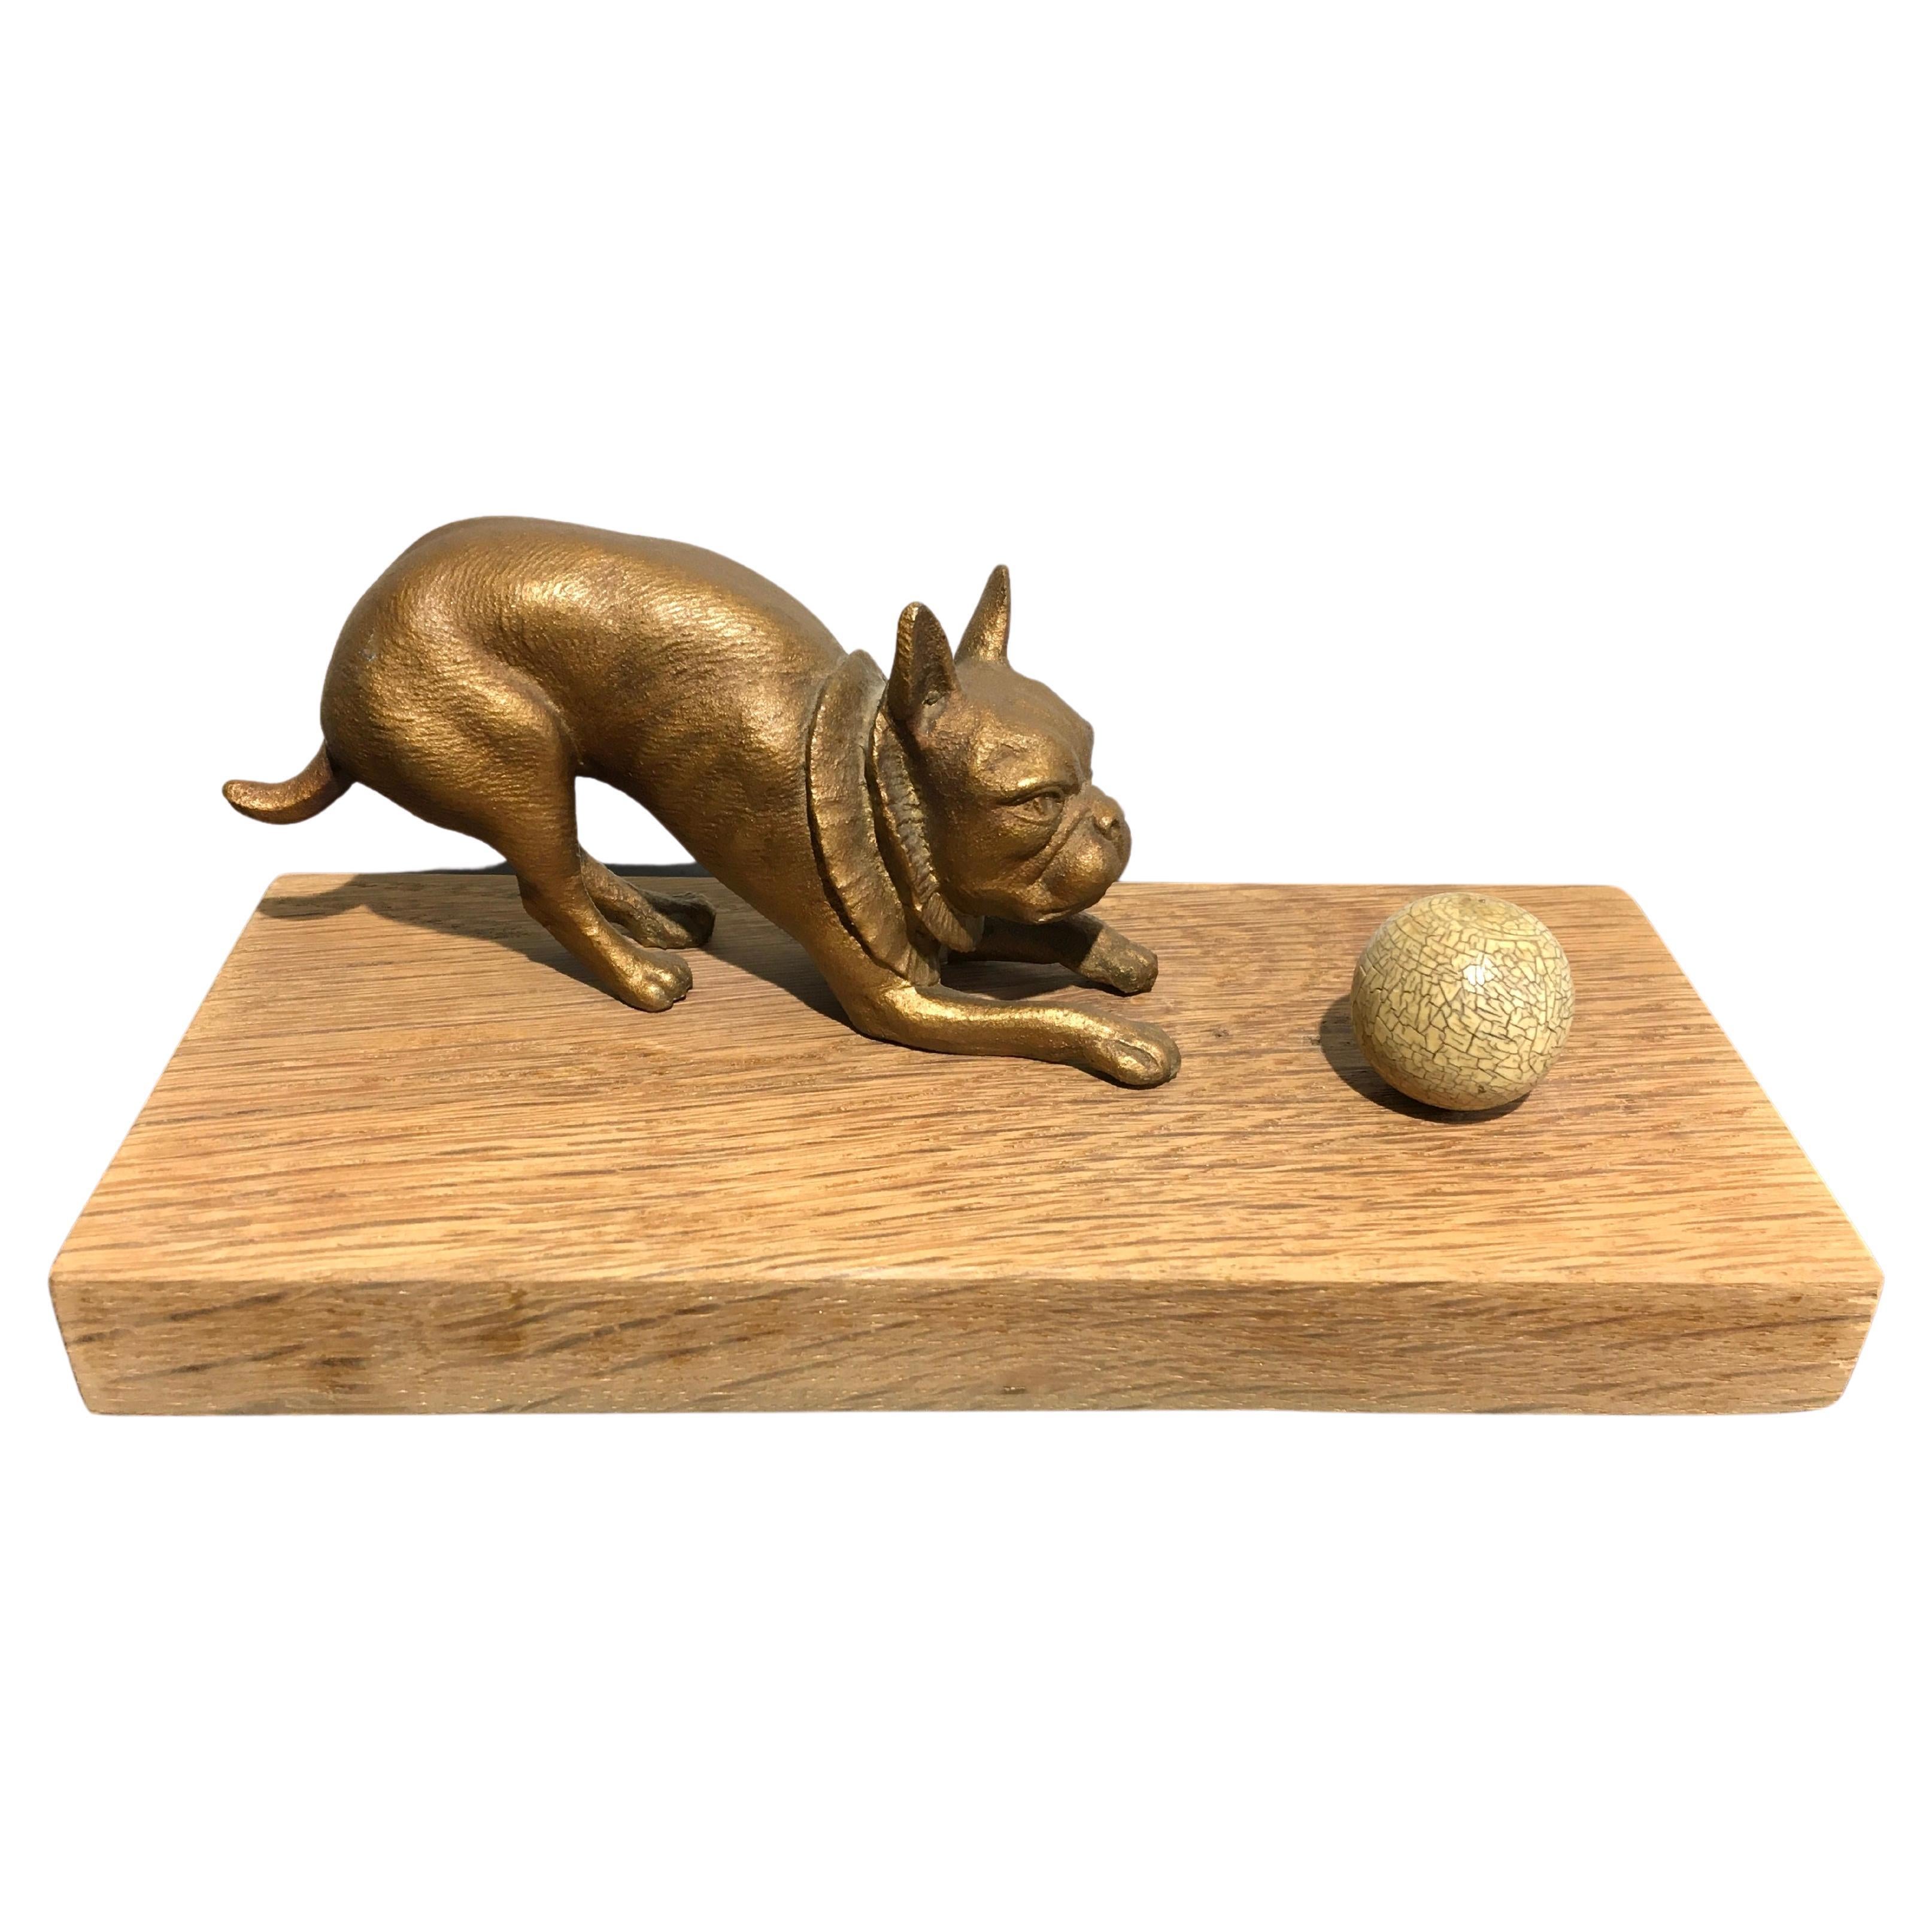 French Bulldog playing with Ball Sculpture For Sale